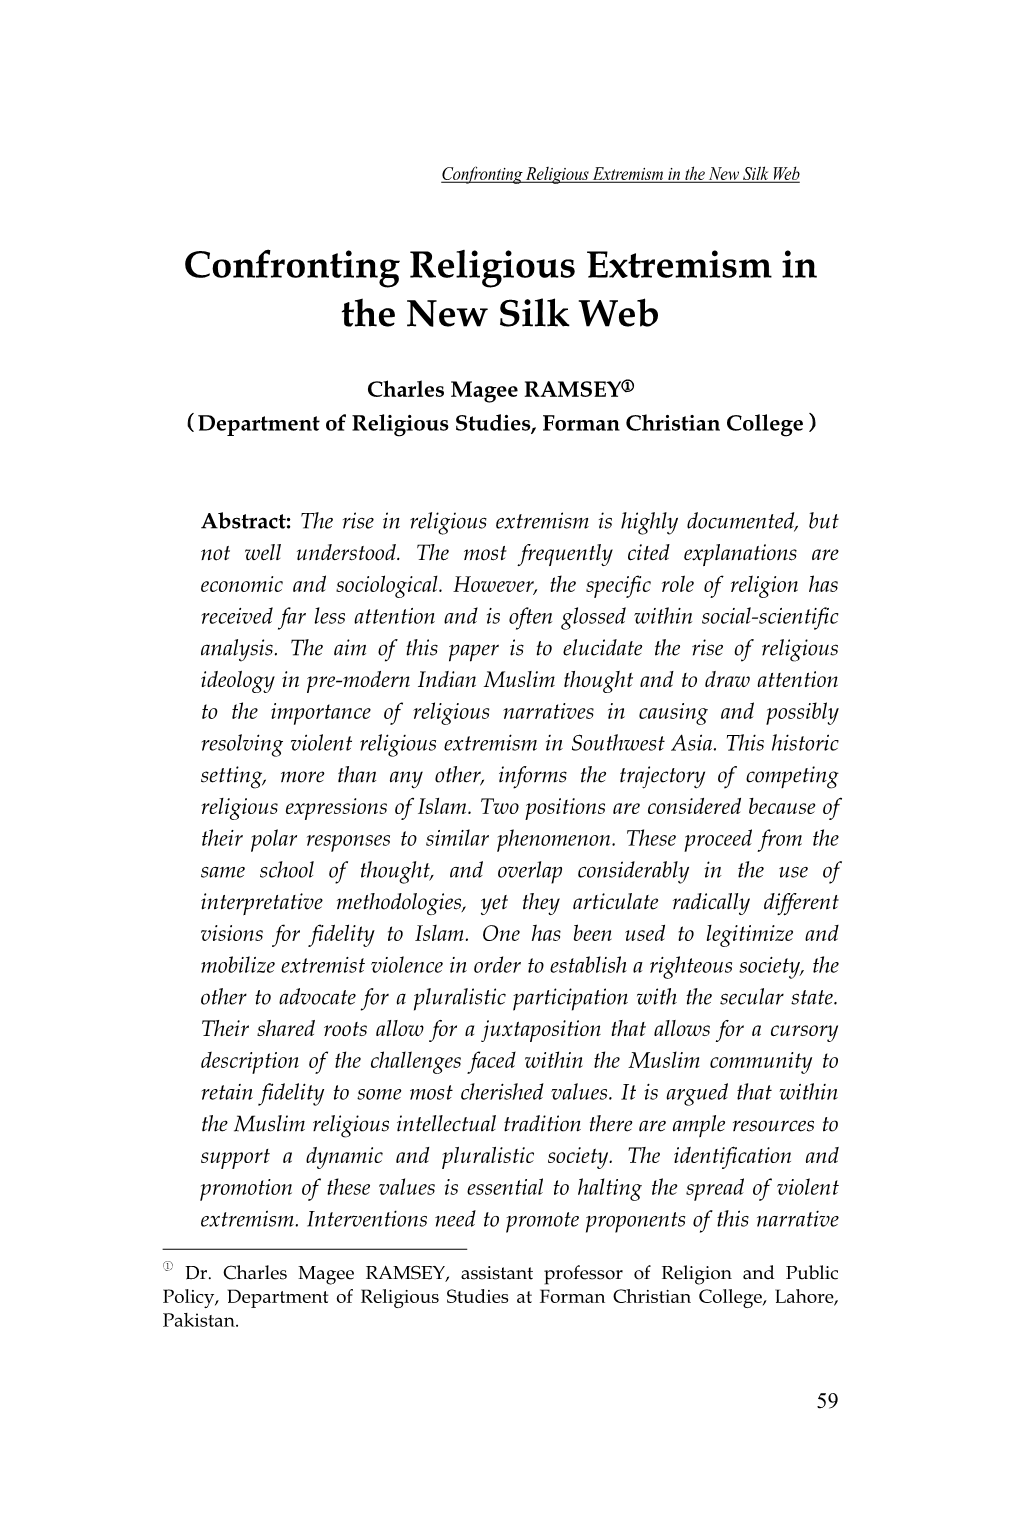 Confronting Religious Extremism in the New Silk Web